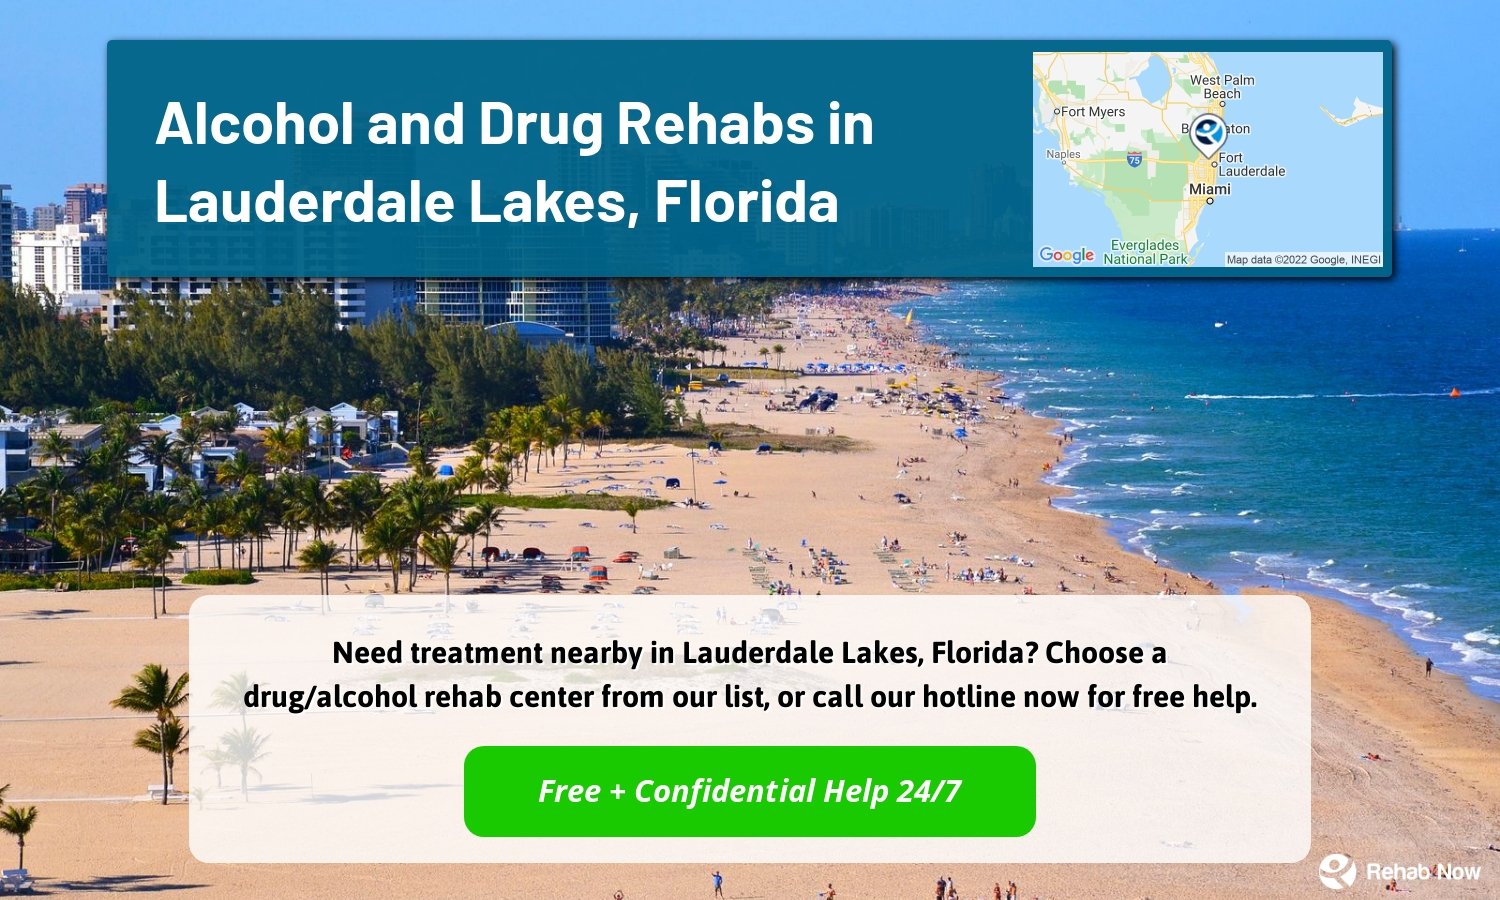 Need treatment nearby in Lauderdale Lakes, Florida? Choose a drug/alcohol rehab center from our list, or call our hotline now for free help.